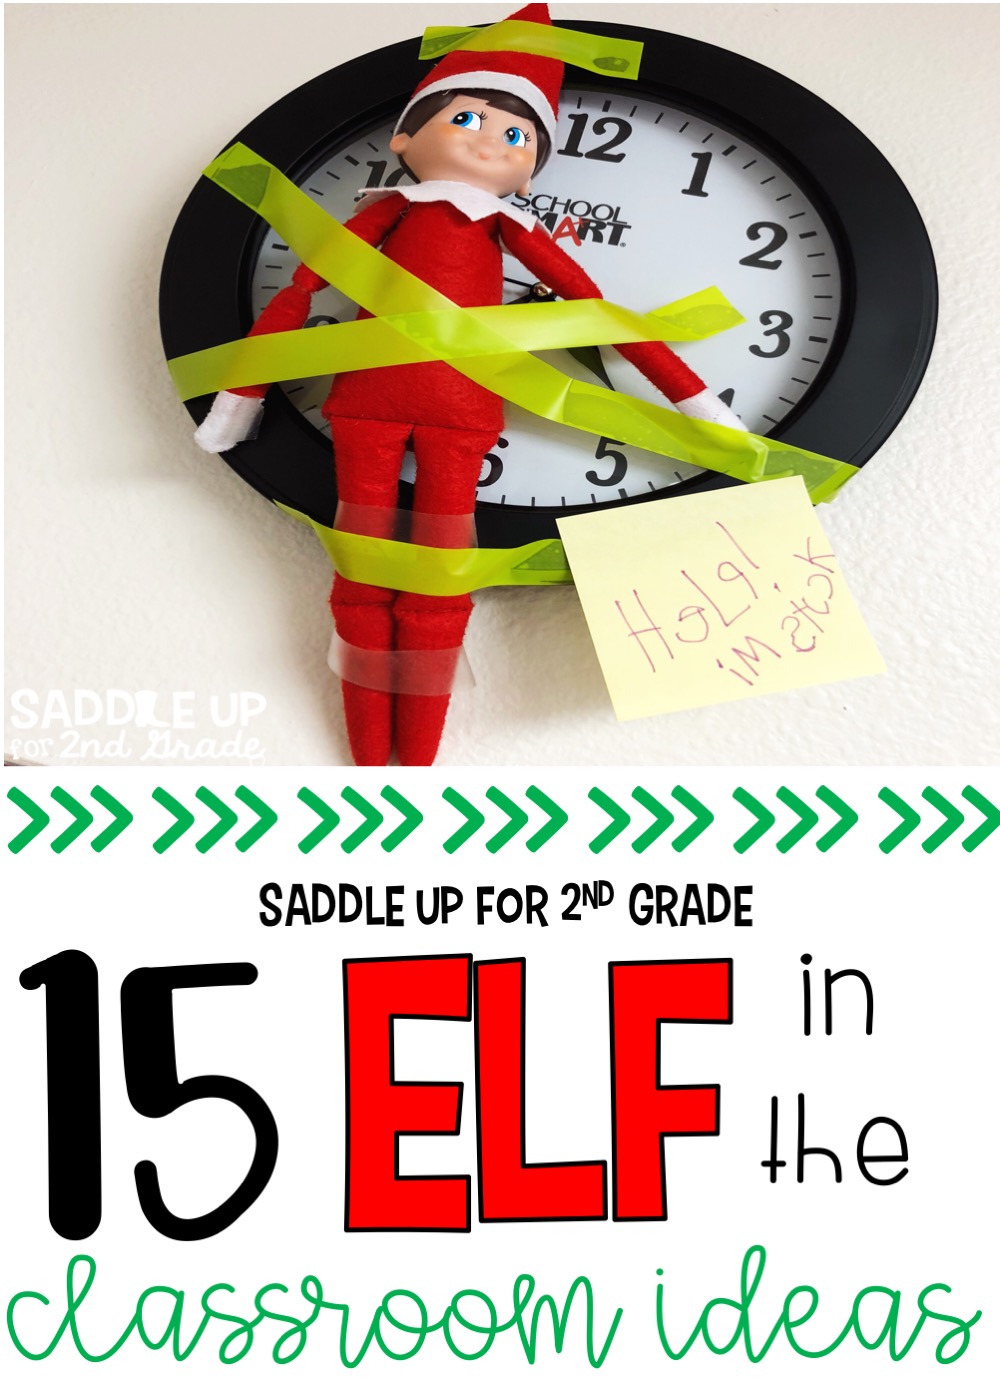 15 Elf in the Classroom Ideas - Saddle Up for 2nd Grade